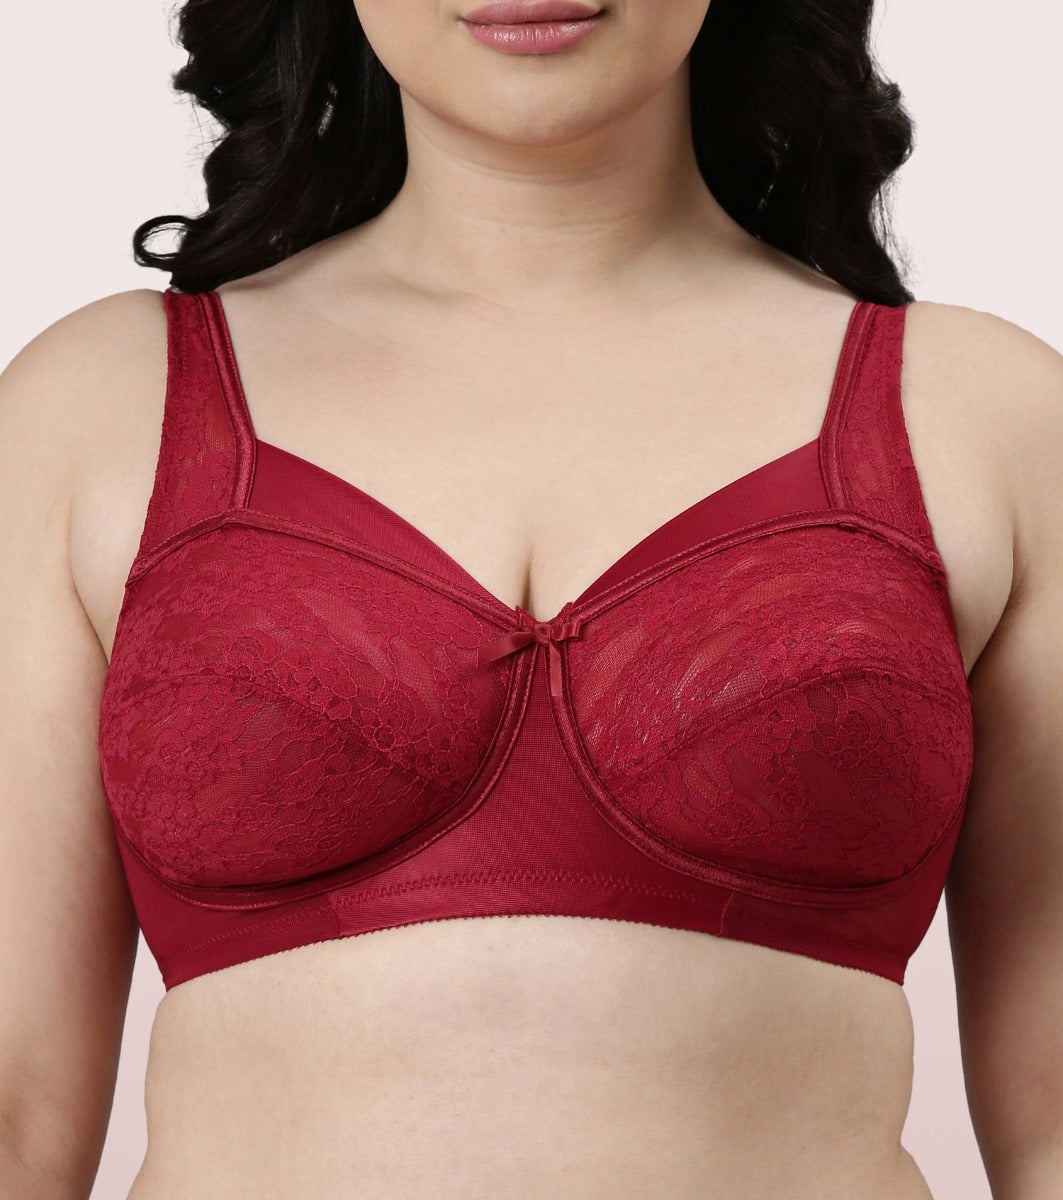 Women's Plus Size Cotton Lace Non-Padded Non Wired Bra Full